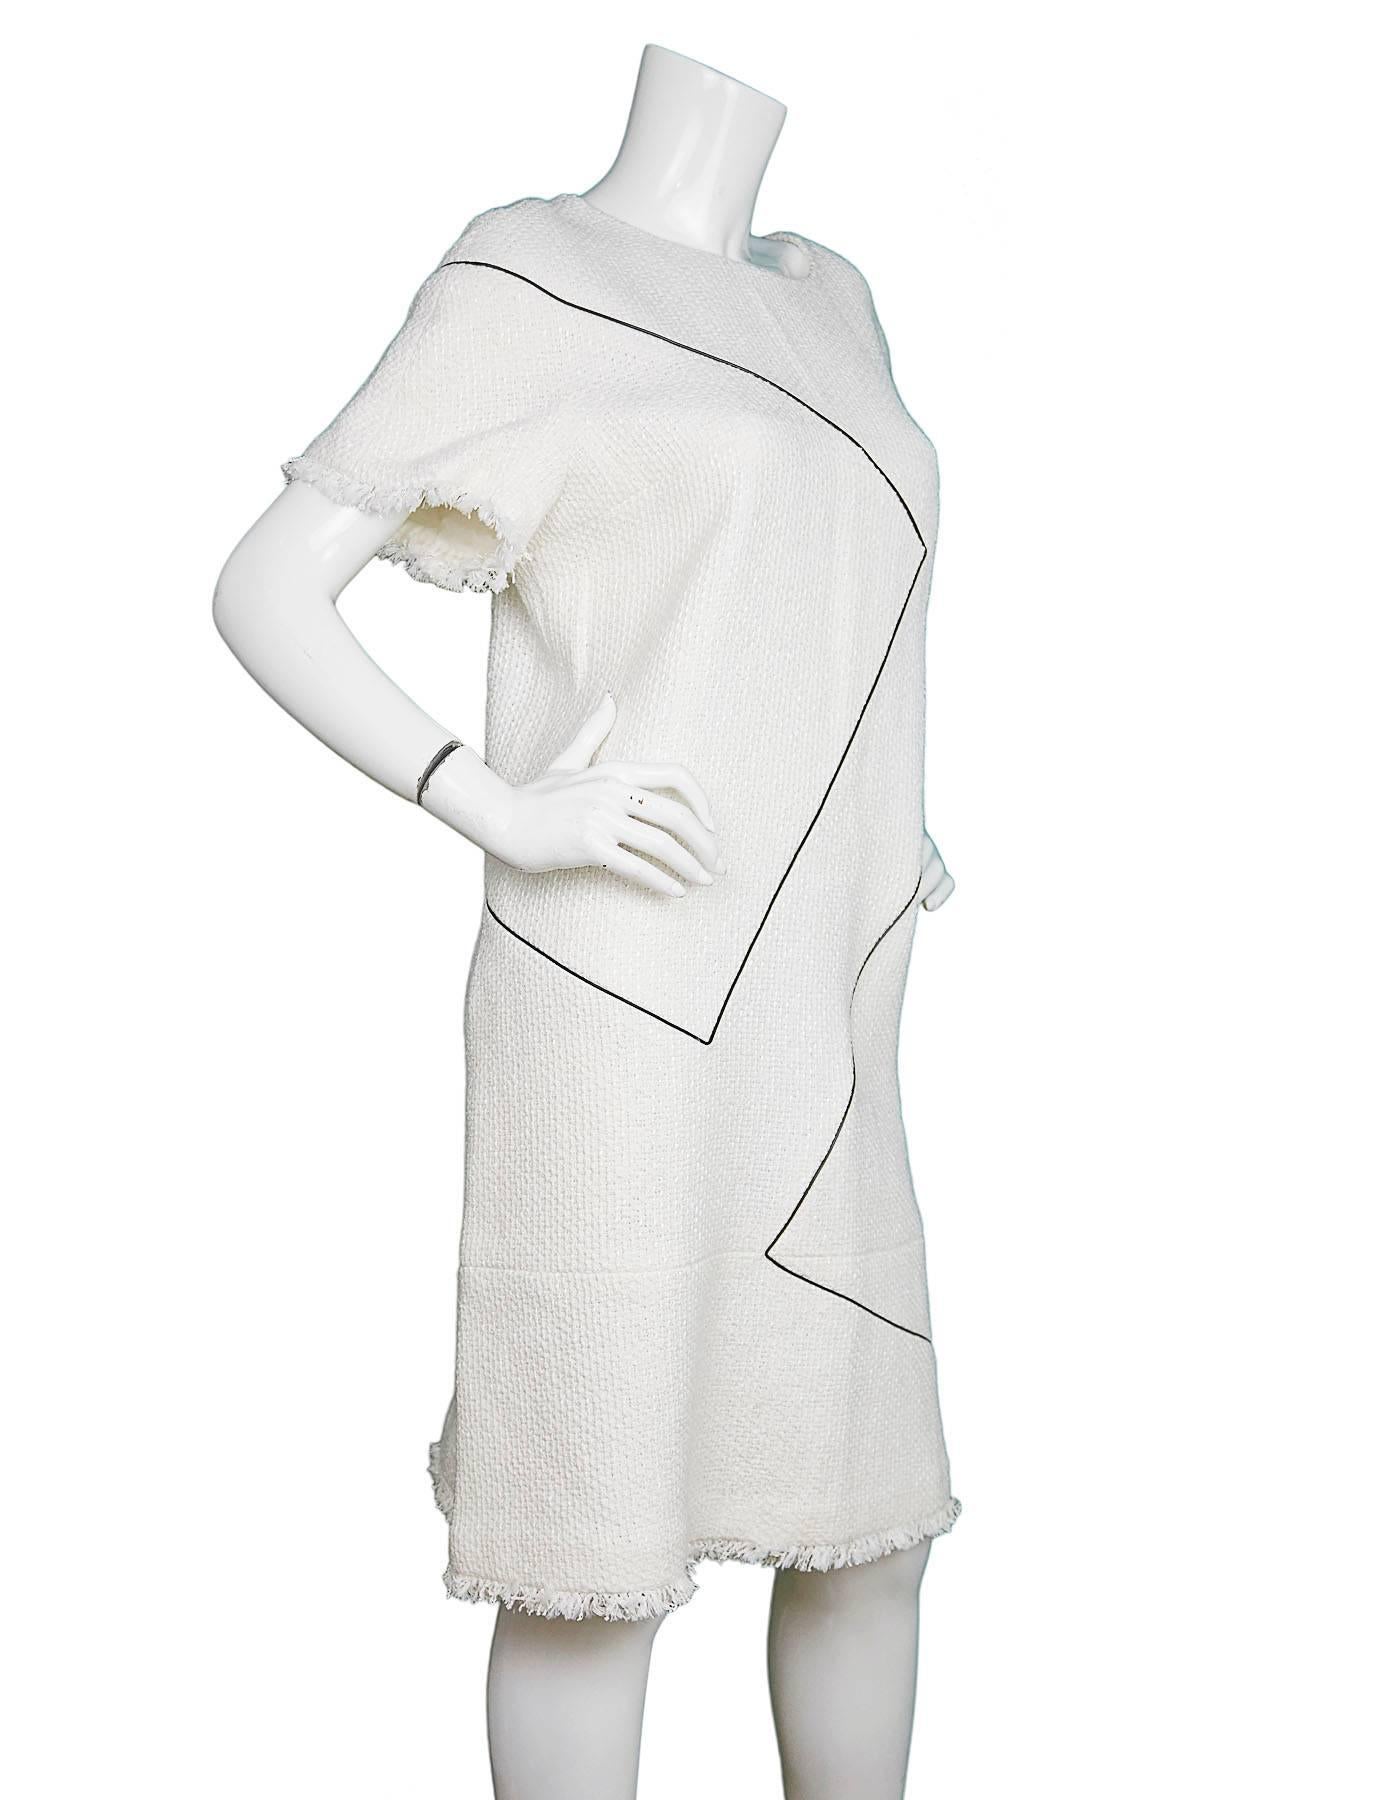 Chanel Pearlized Ivory Shift Dress 
Features black piping throughout

Made In: France
Color: Ivory and black
Composition: 58% cotton, 23% polyurethane, 10% nylon, 5% acrylic, 4% wool
Lining: Ivory, 100% silk
Closure/Opening: Back center zip